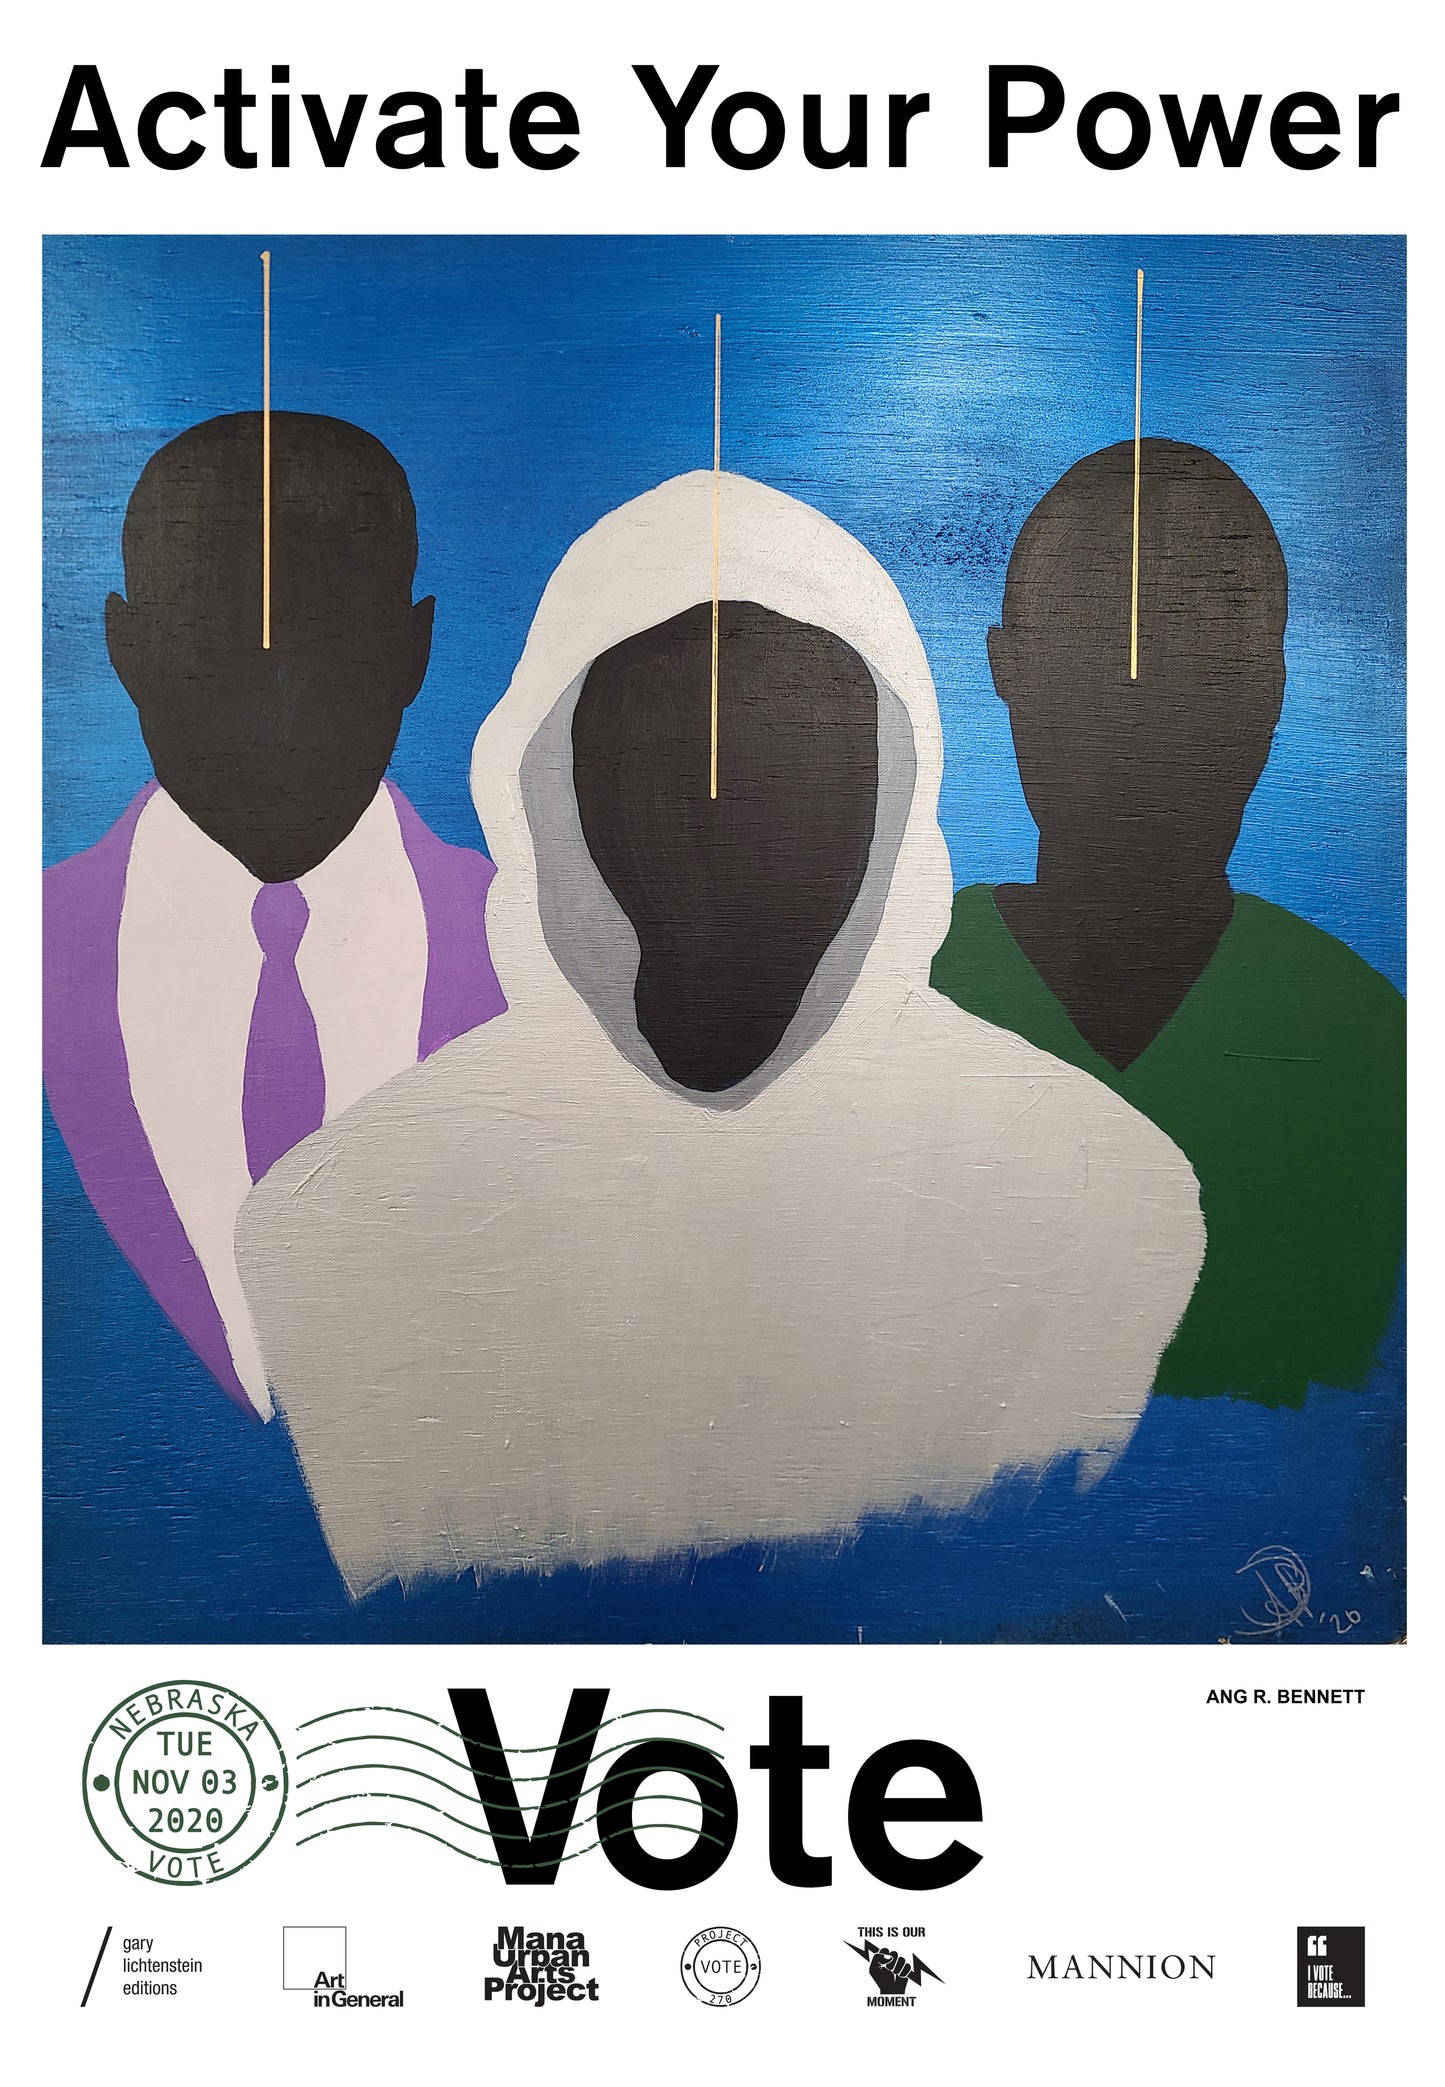 Nebraska Get Out The Vote Poster by Ang R. Bennett